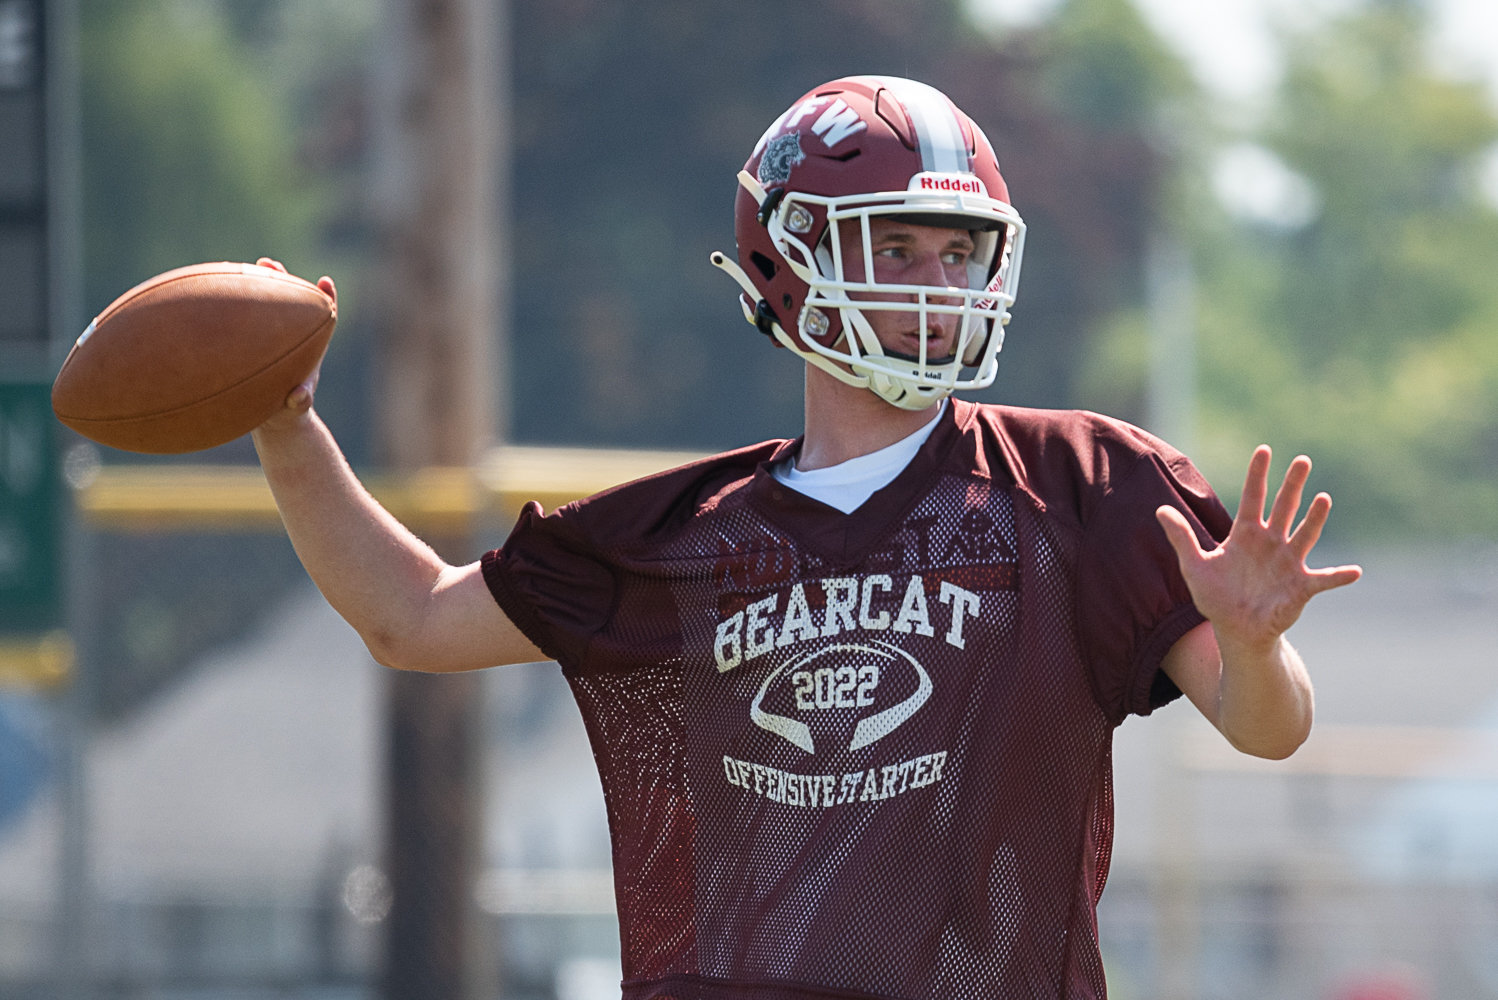 W.F. West quarterback Gavin Fugate throws a pass during a drill Aug. 17 on the first day of fall camp in Chehalis.